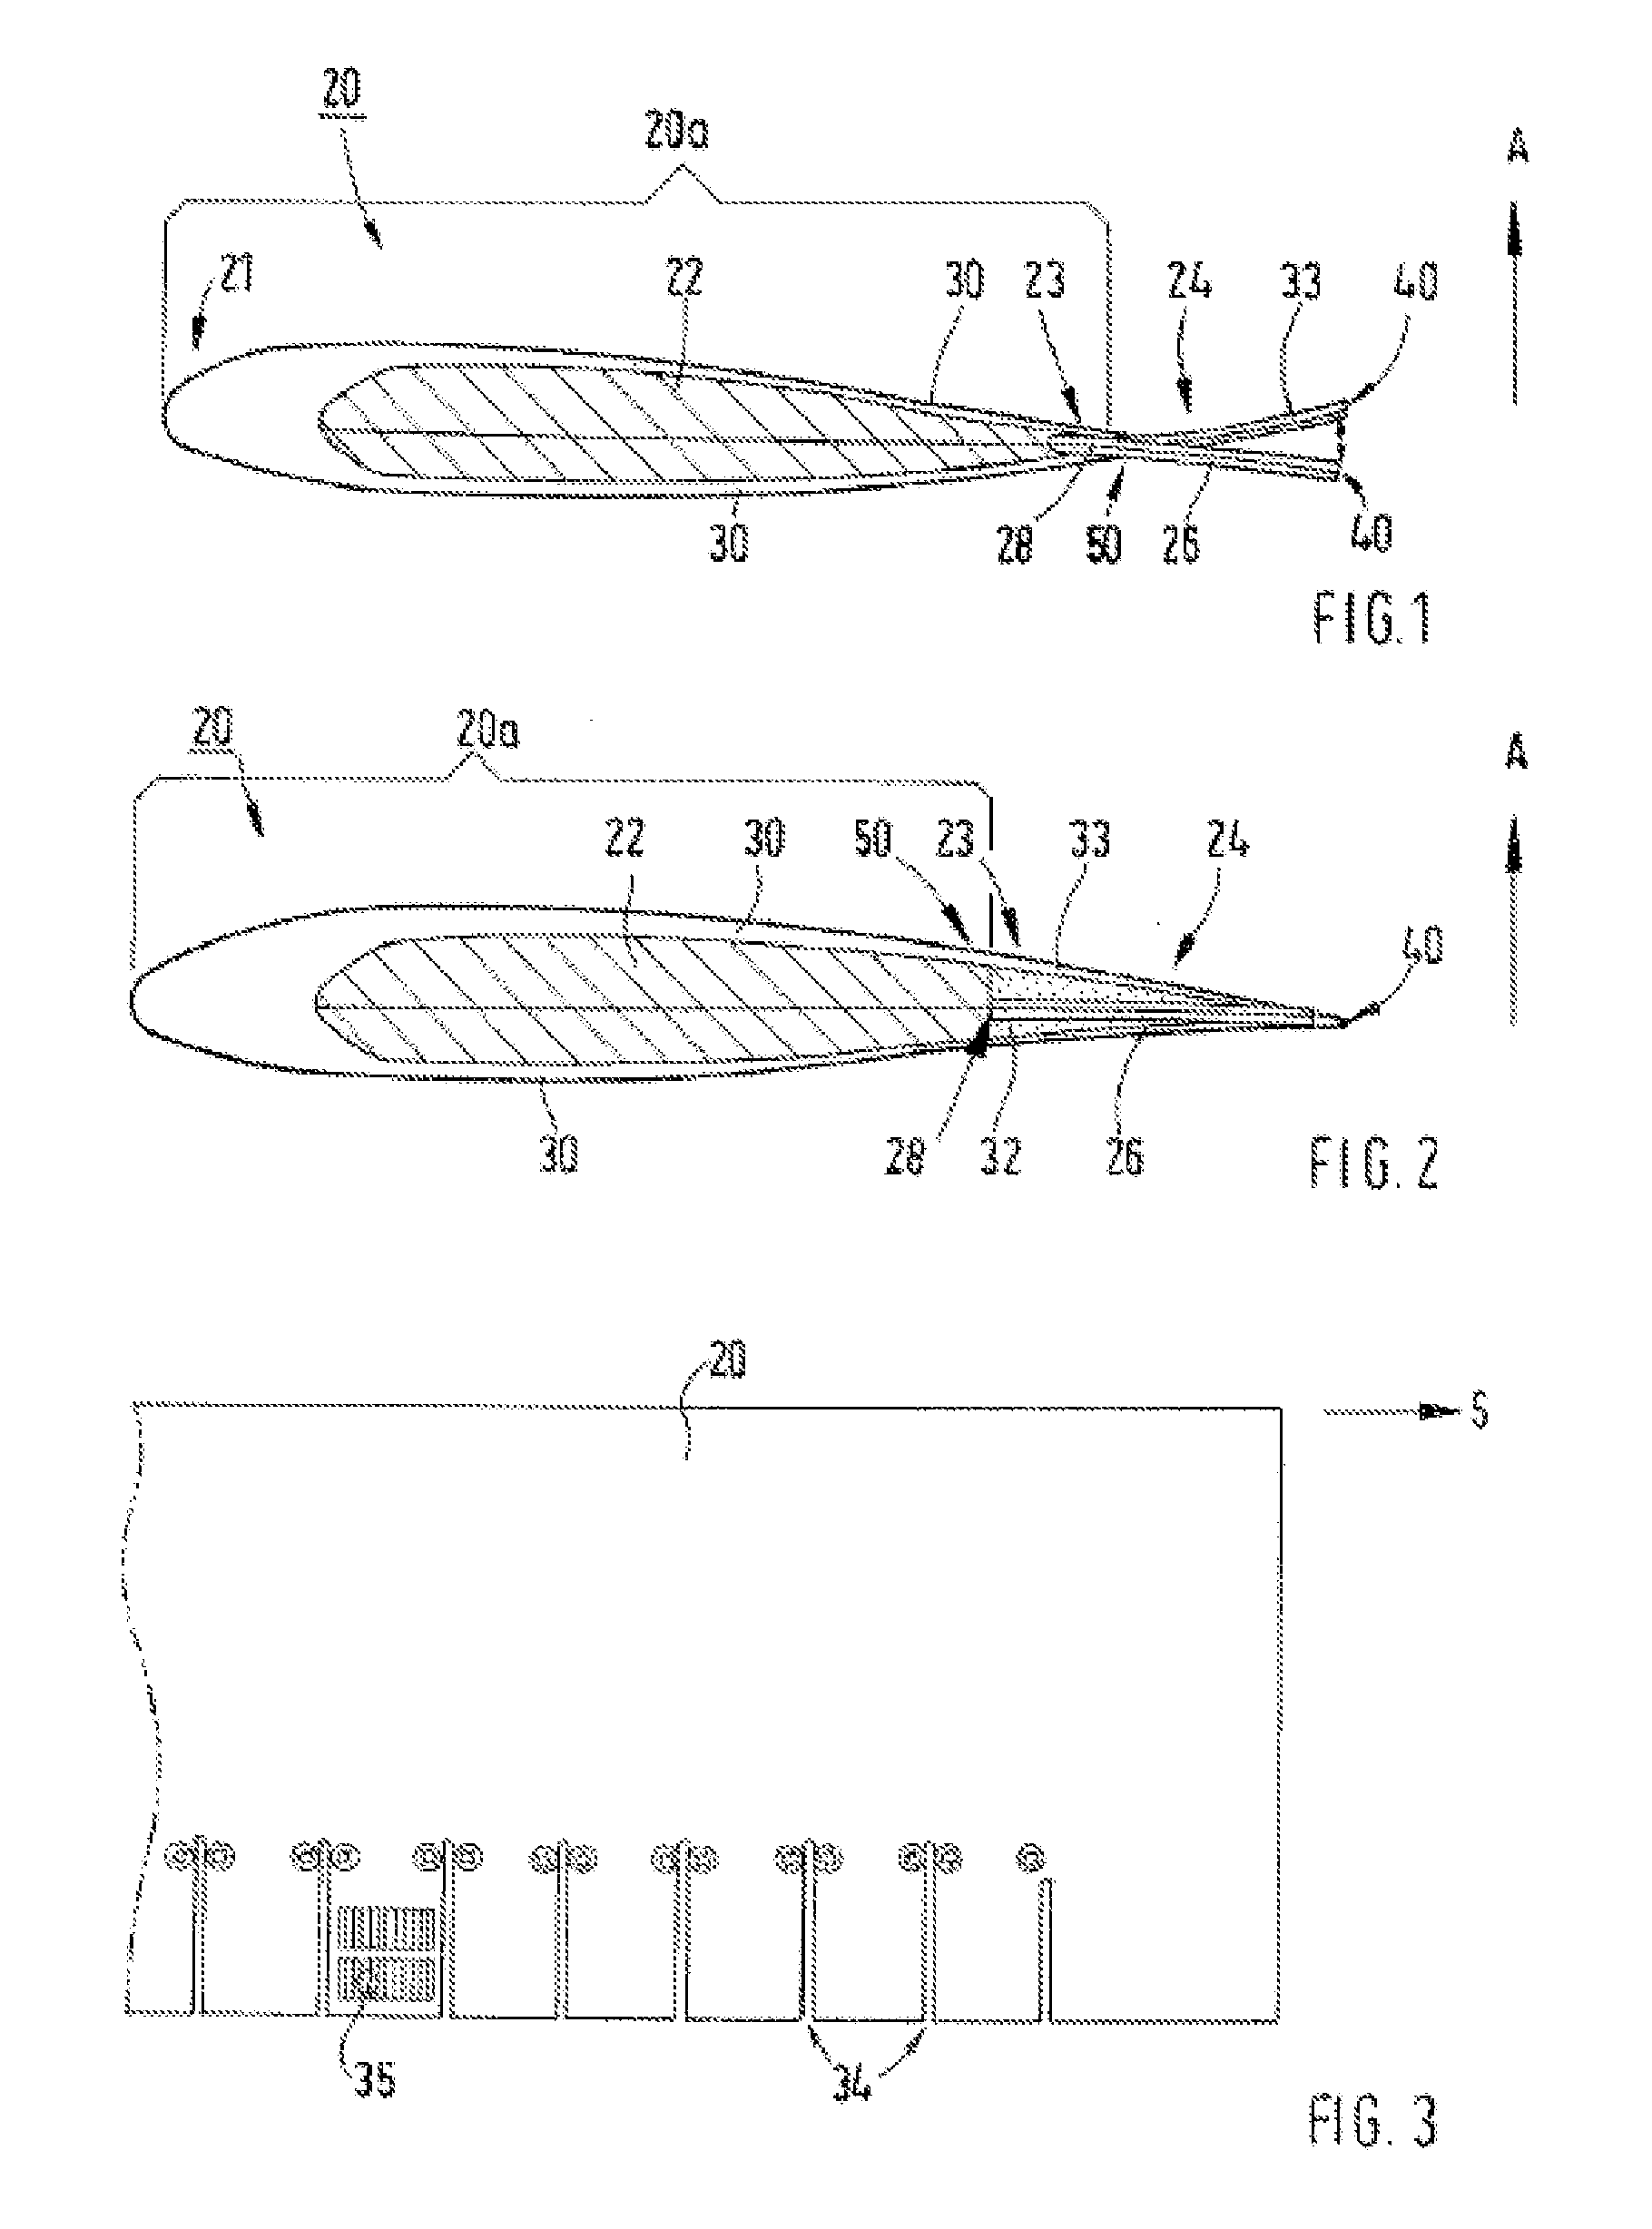 Rotor blade for a rotary wing aircraft